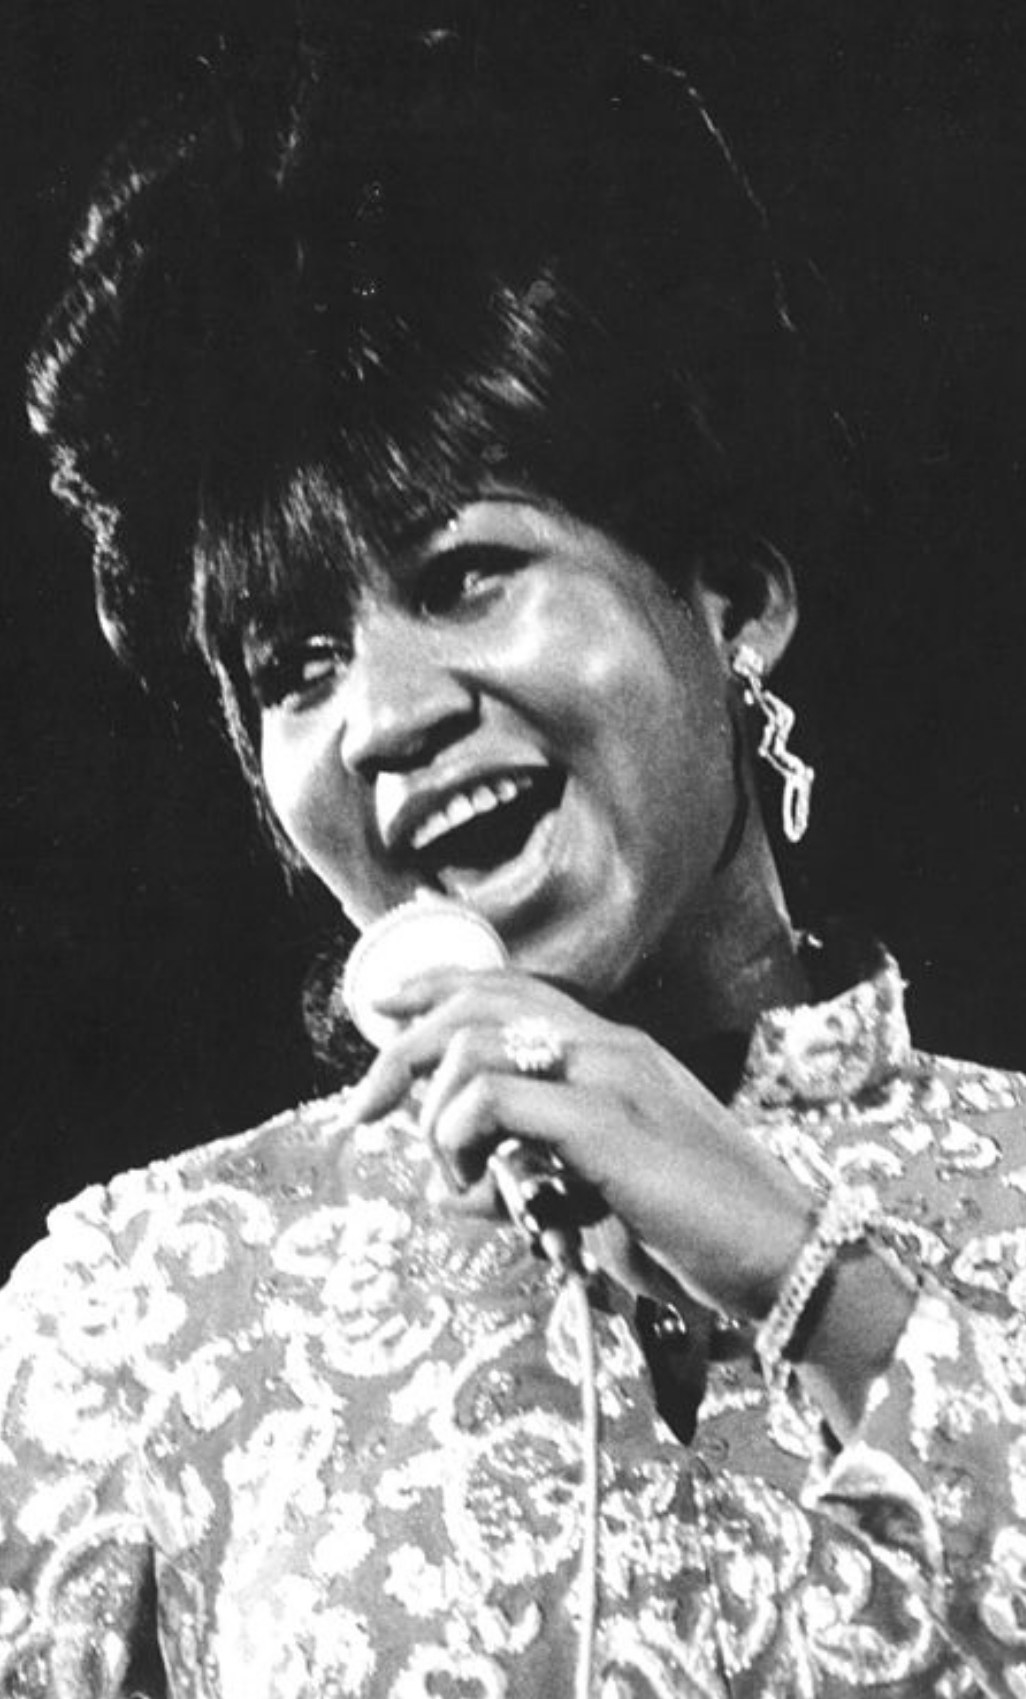 Franklin performing in concert in 1968